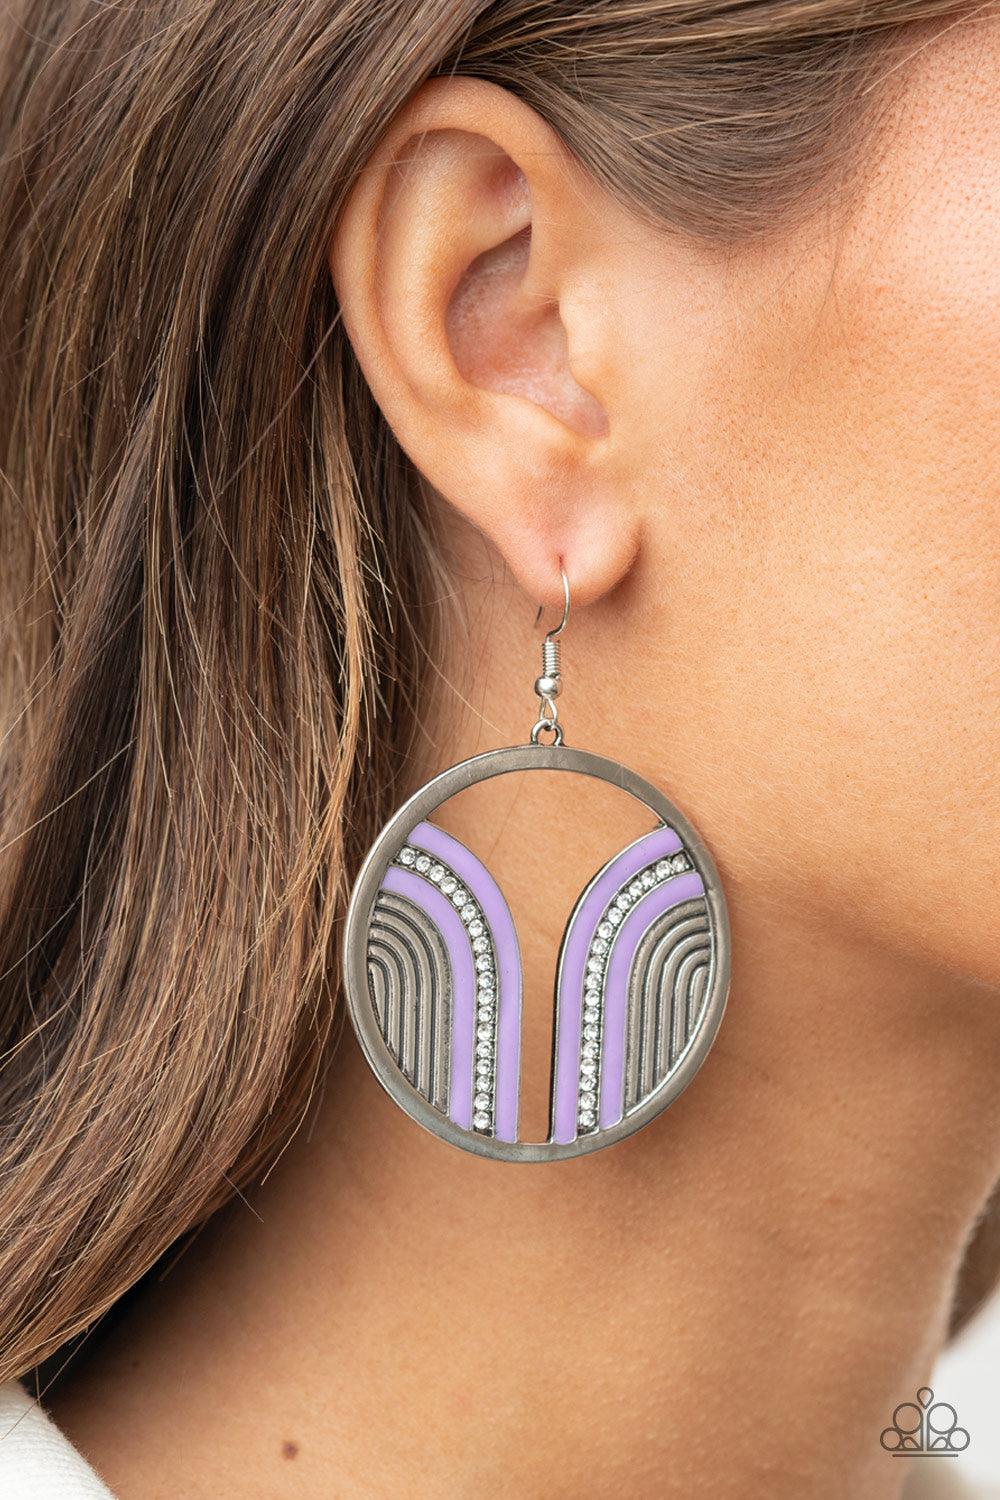 Paparazzi Accessories Delightfully Deco - Purple Infused with a glittery row of white rhinestones, shiny purple arcs curve into juxtaposed frames inside a classic silver hoop, creating a colorful art deco inspired centerpiece. Earring attaches to a standa